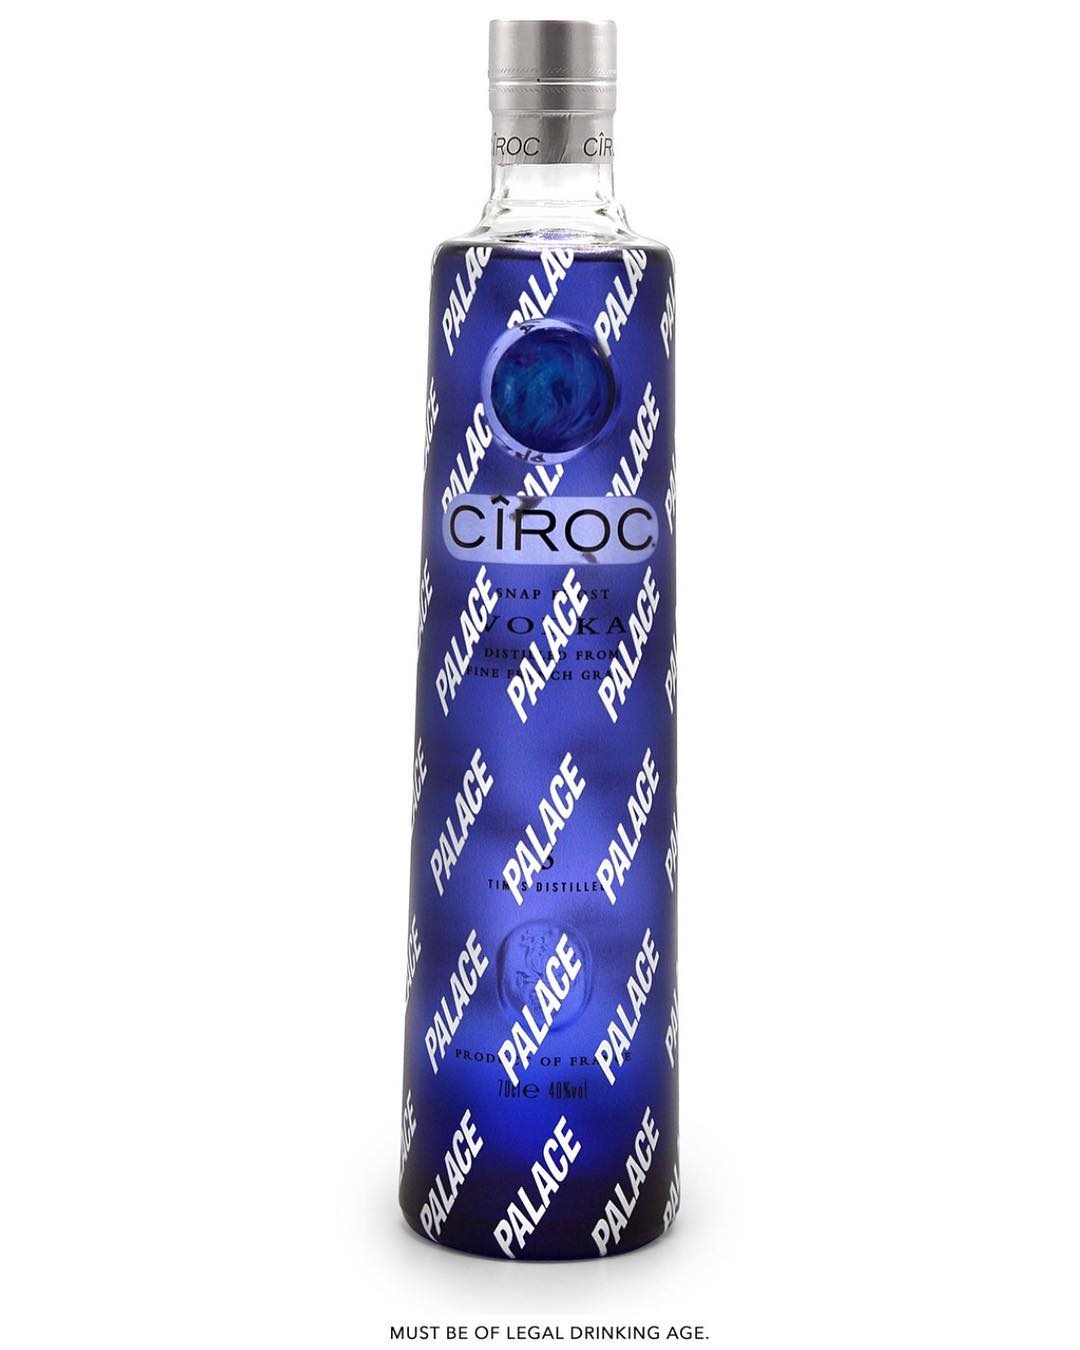 Palace X Ciroc Collab Set To Be Released This Friday